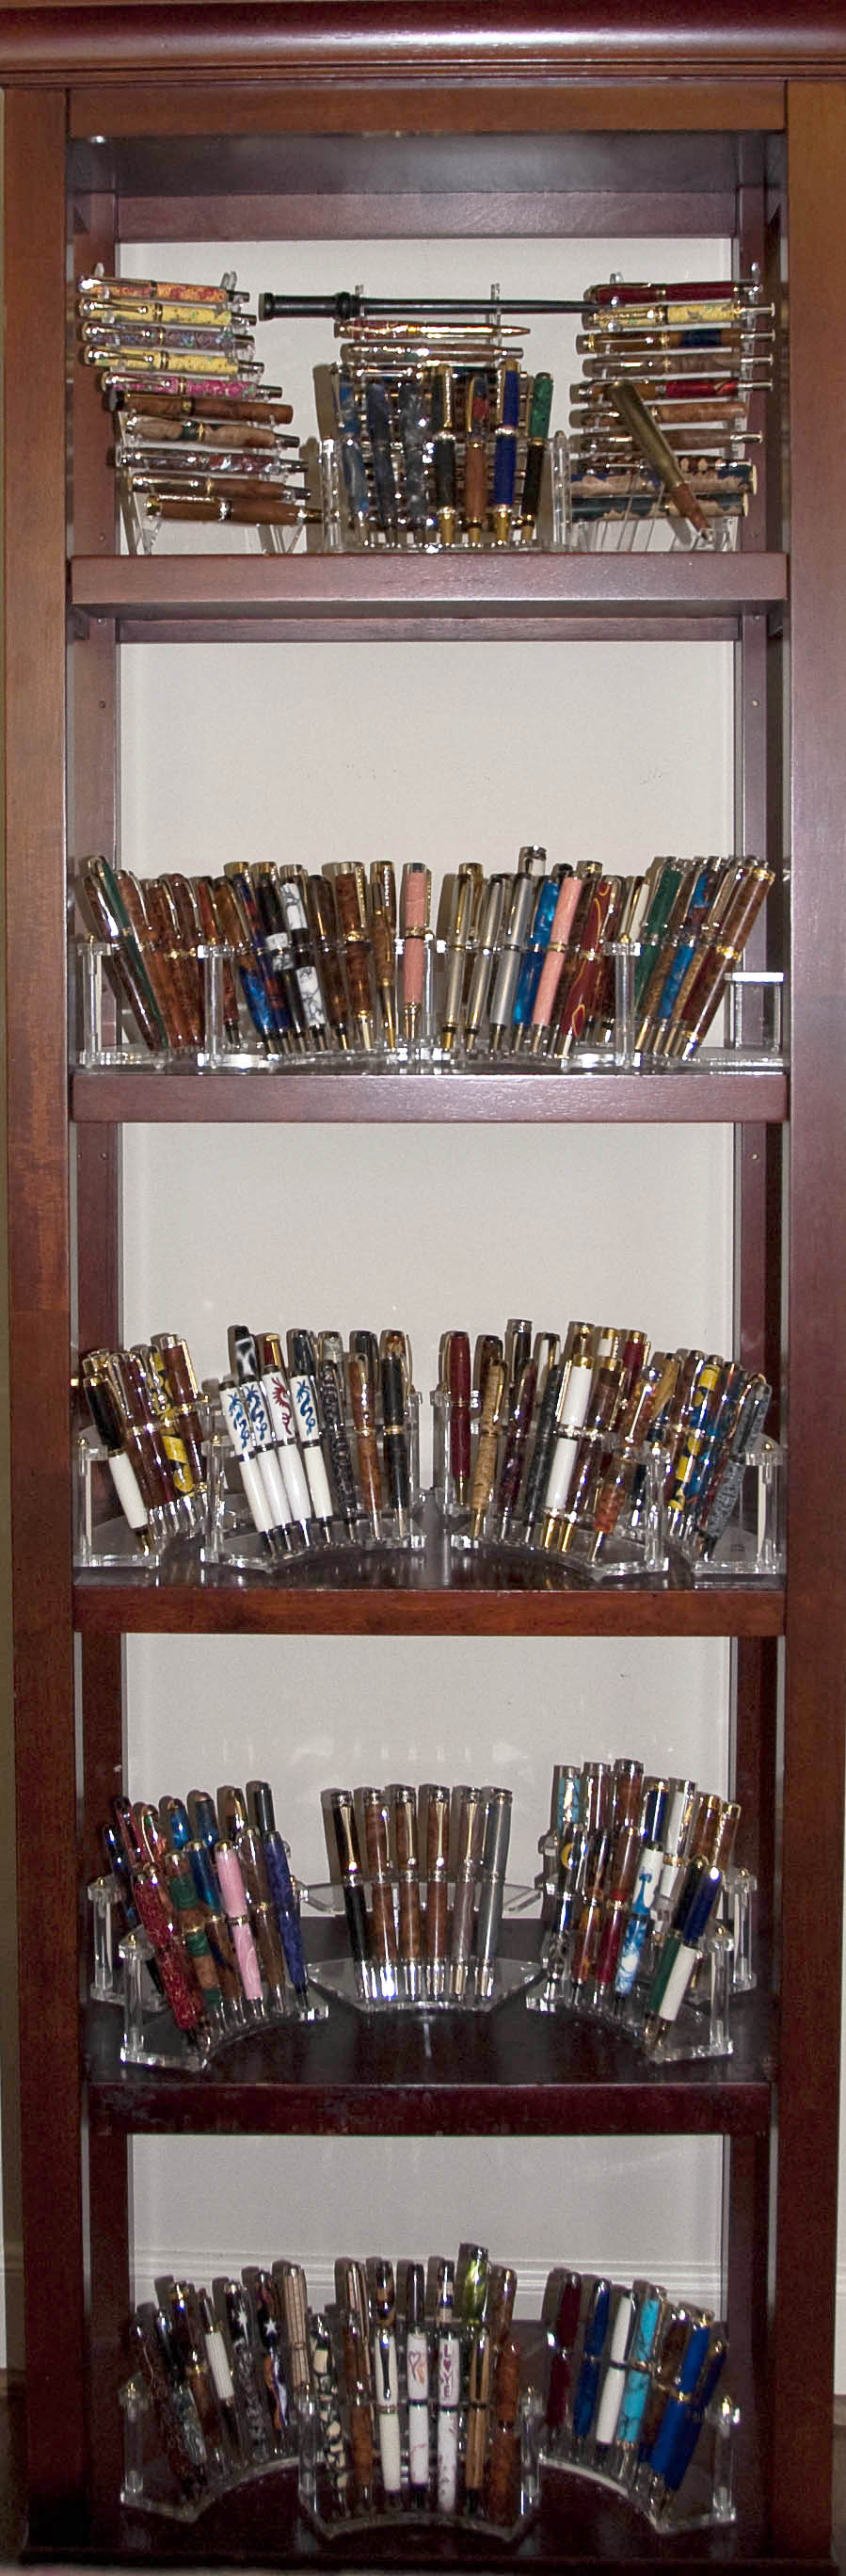 Pen Collection Group I